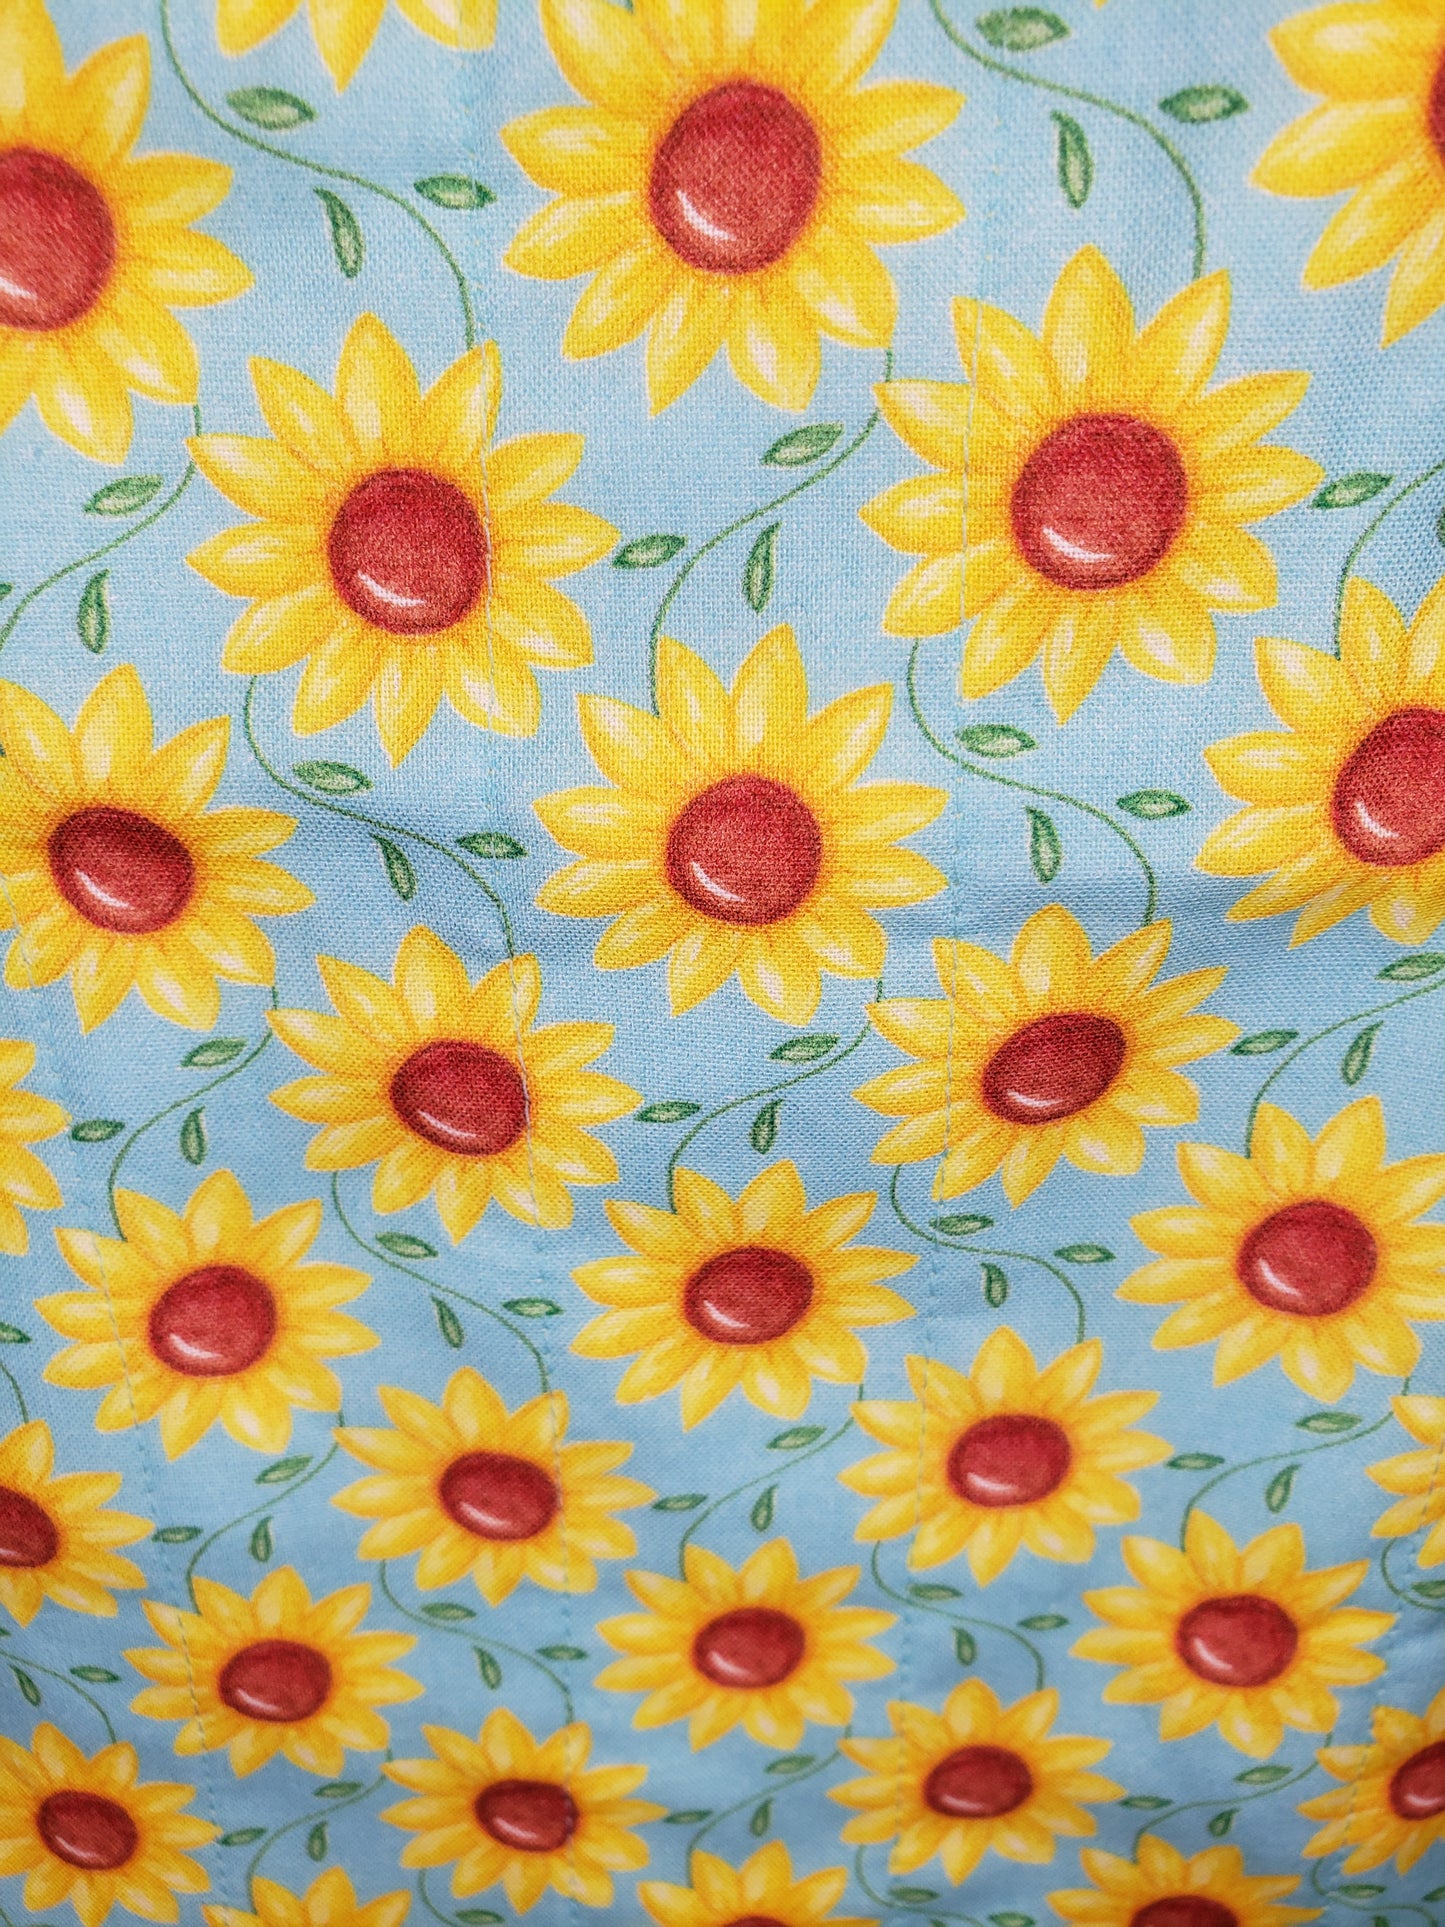 Tote bag, Quilted Tote Bag, Sunflower bag